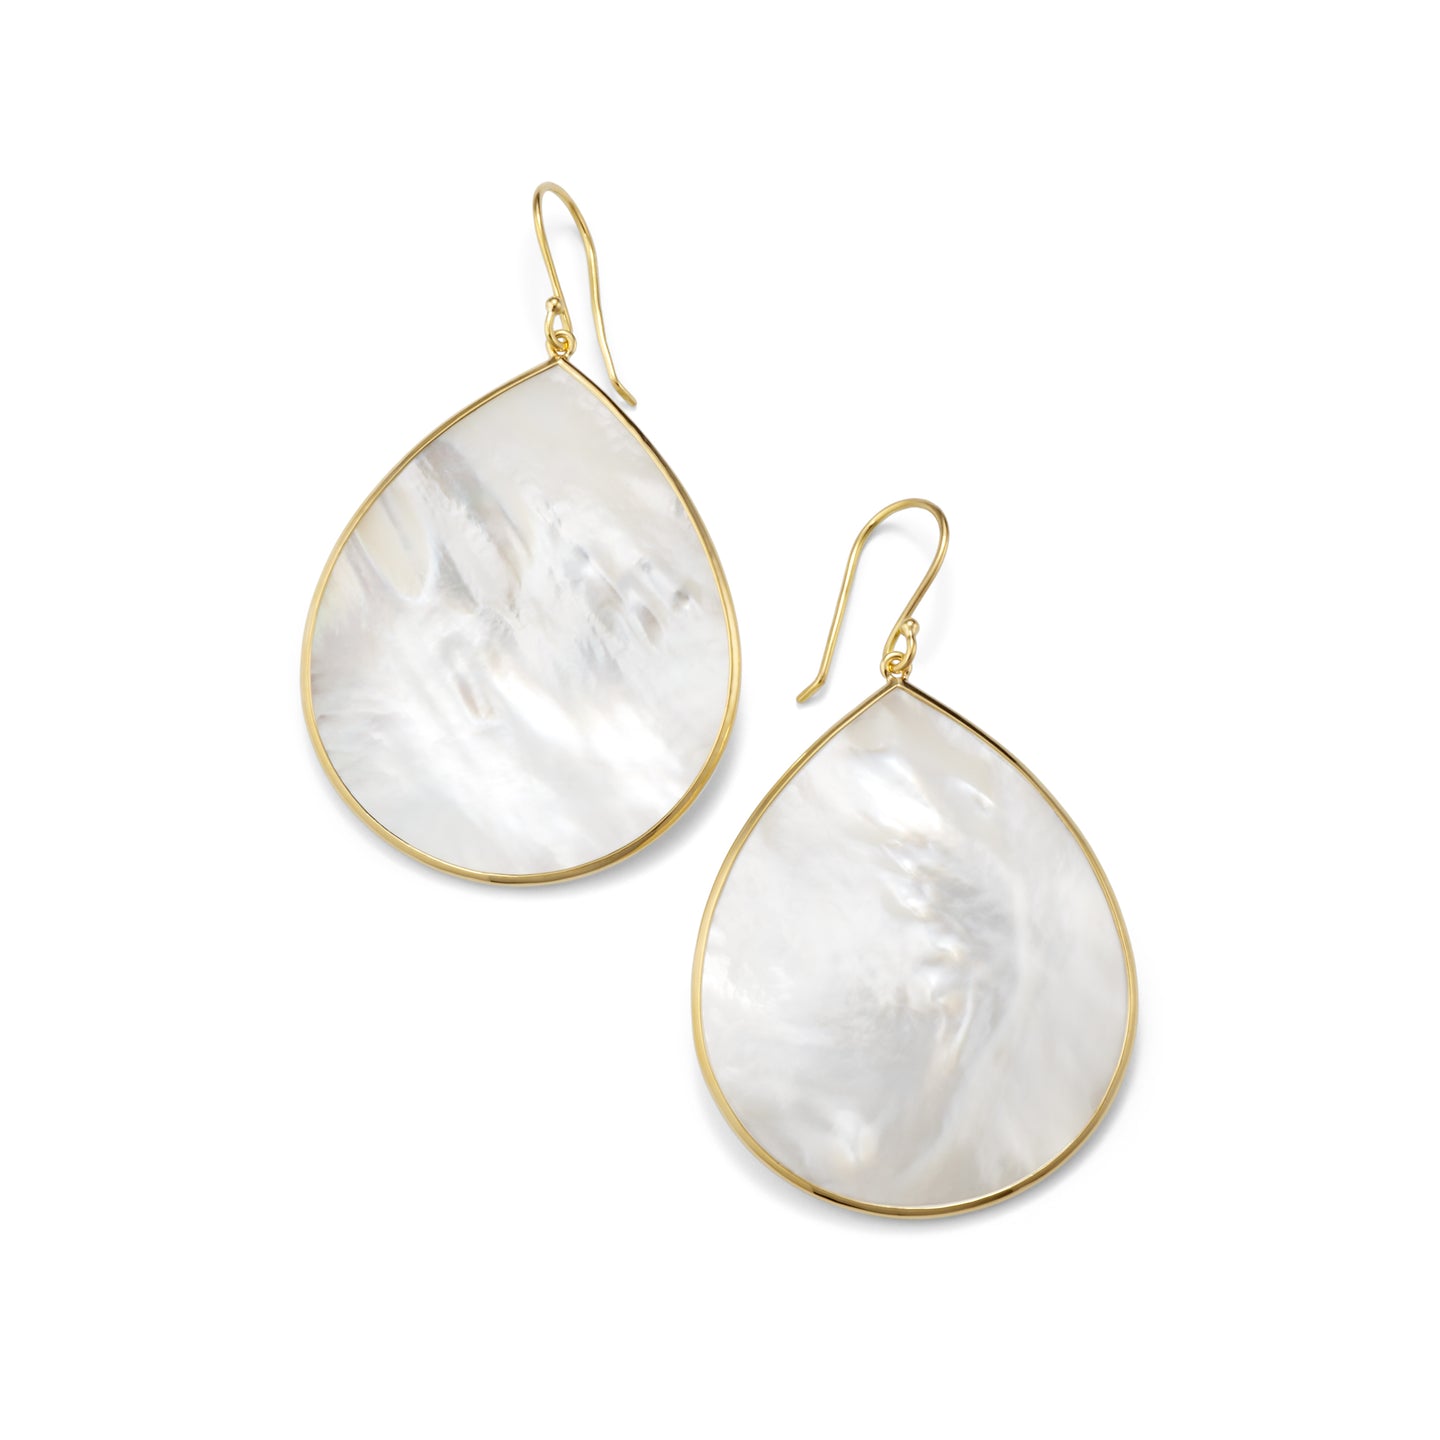 IPPOLITA Polished Rock Candy® 18K Yellow Gold Large Teardrop Earrings in Mother-of-Pearl